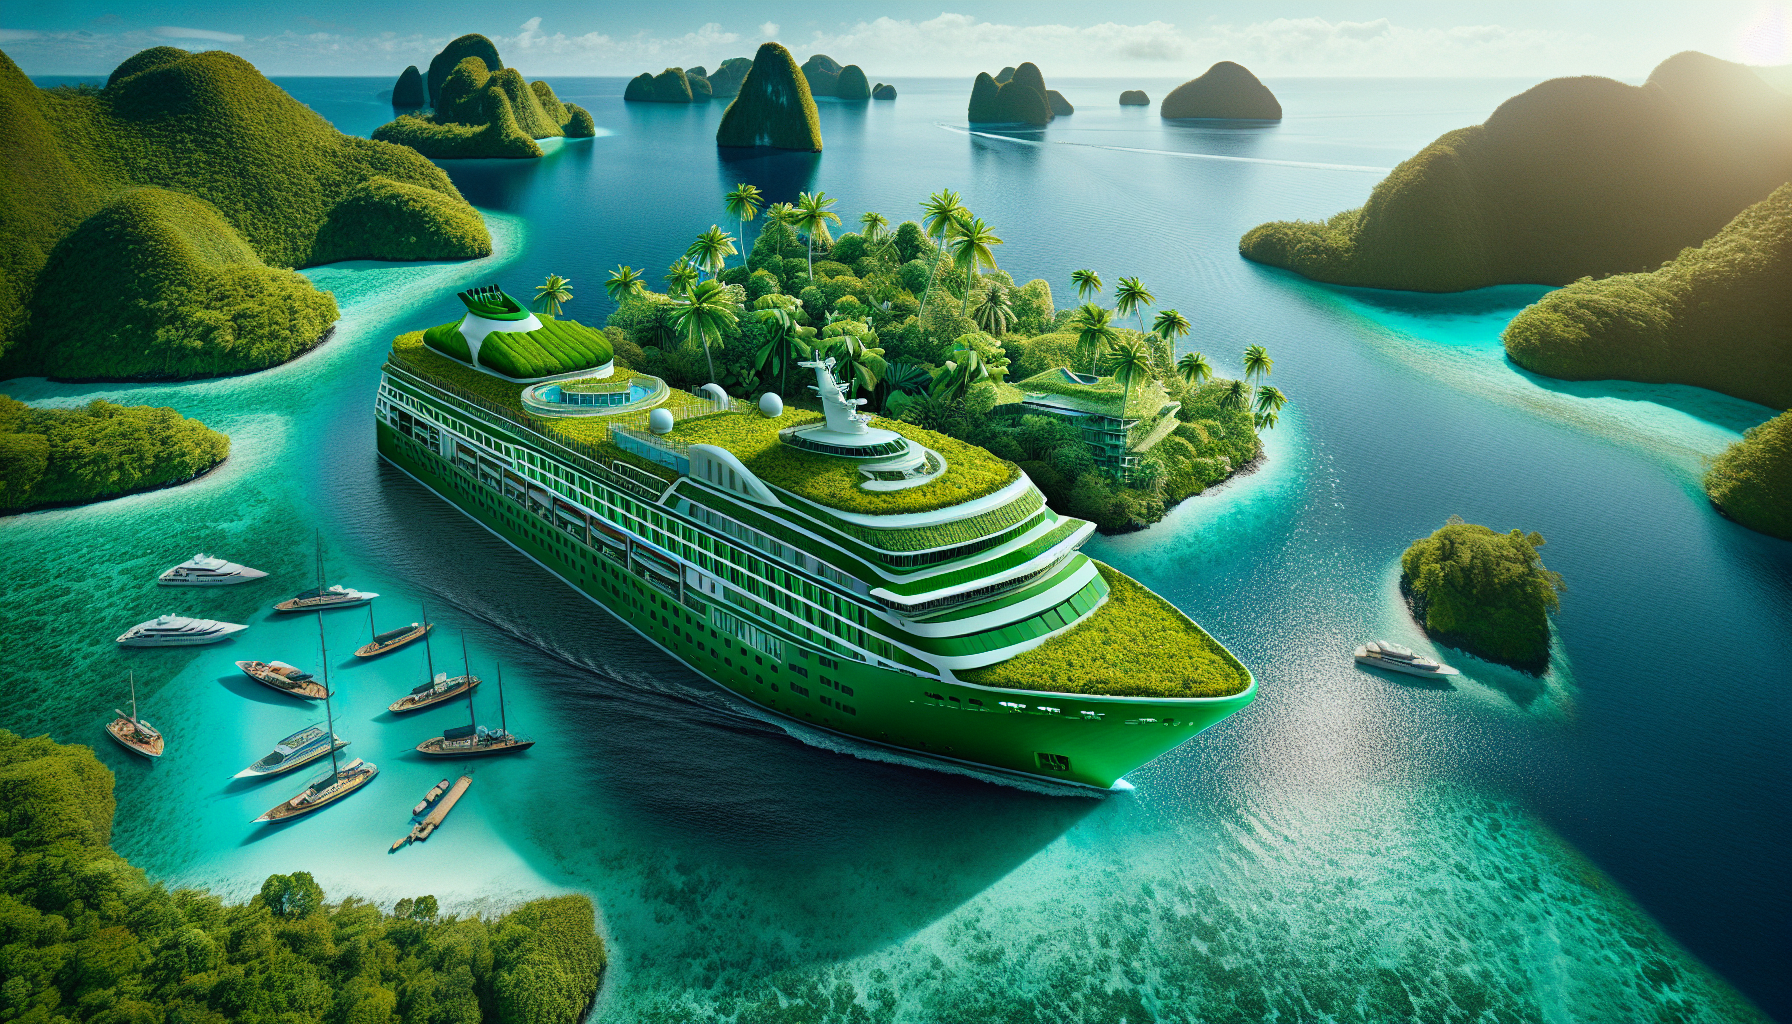 discover how green cruises contribute to conservation and preservation efforts, and learn how you can be a part of sustainable travel on the seas with green cruises.